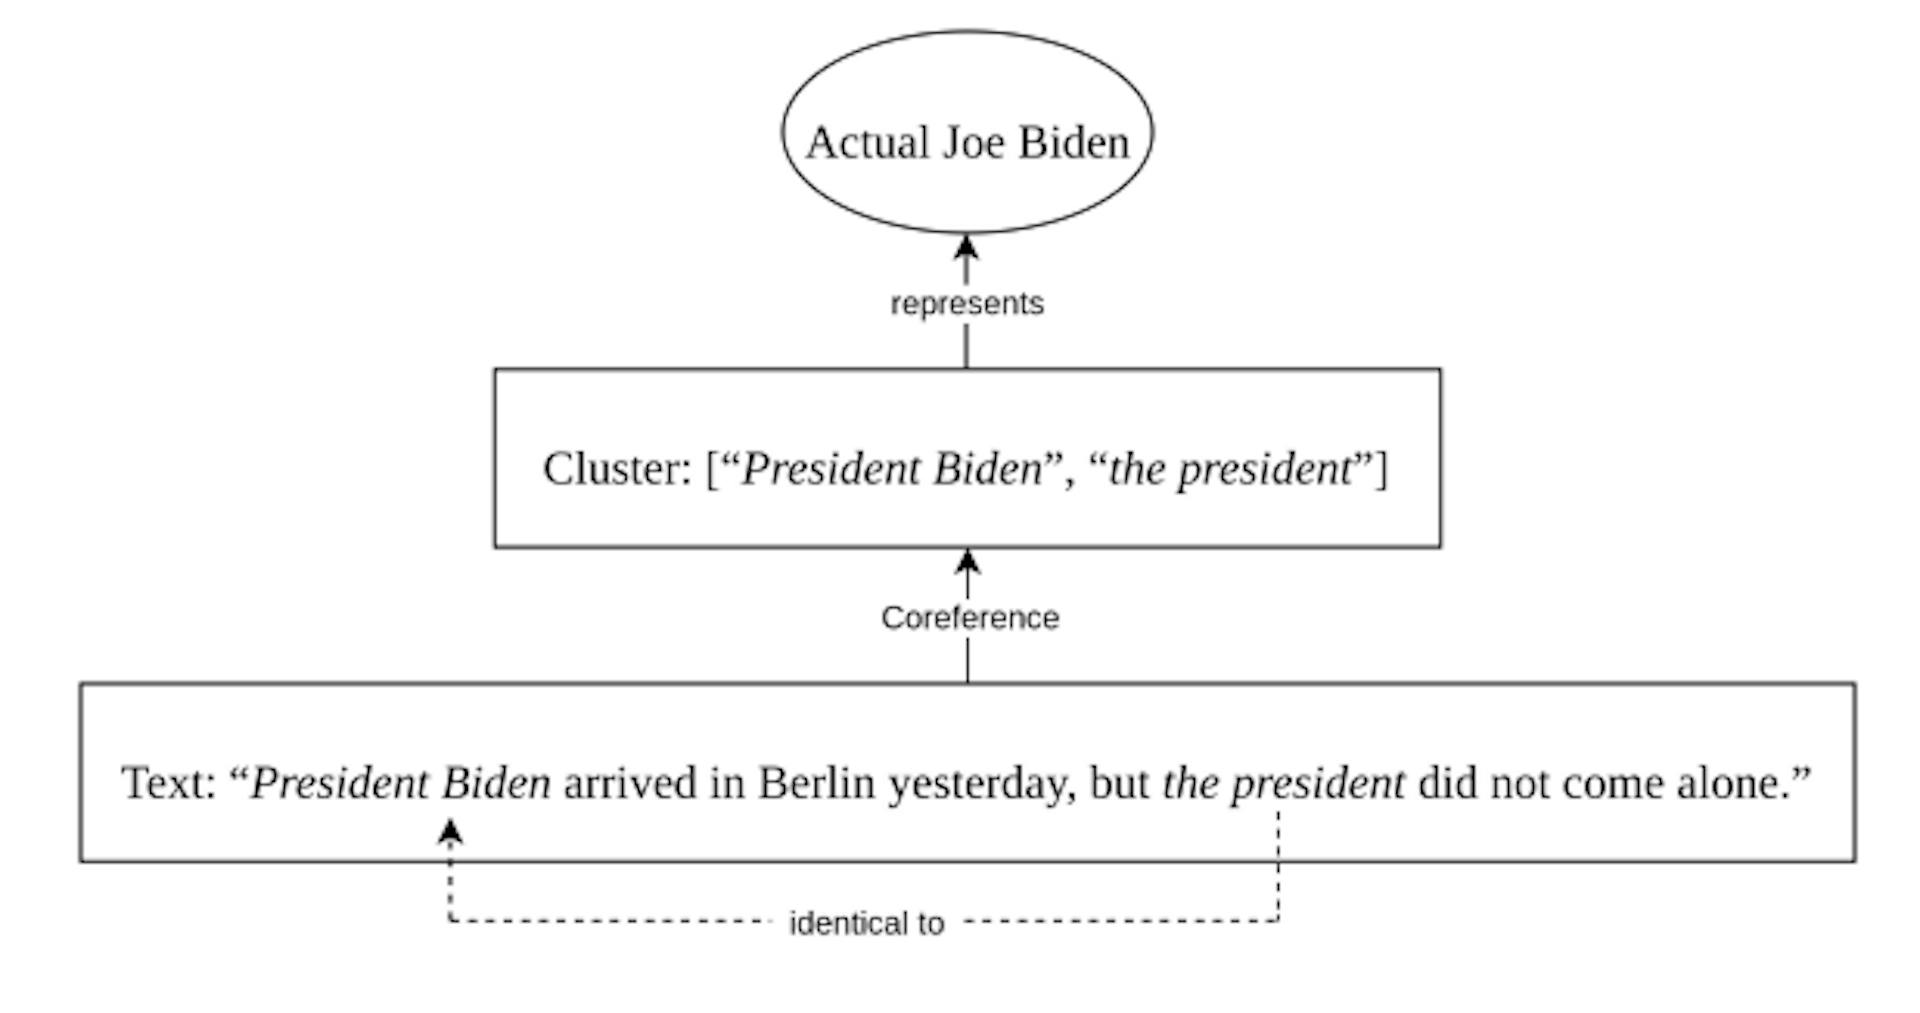 Figure 1: Illustration of how a cluster can be formed from an antecedent and its anaphor(s). The cluster represents its referent, in this case Joe Biden, in a text.